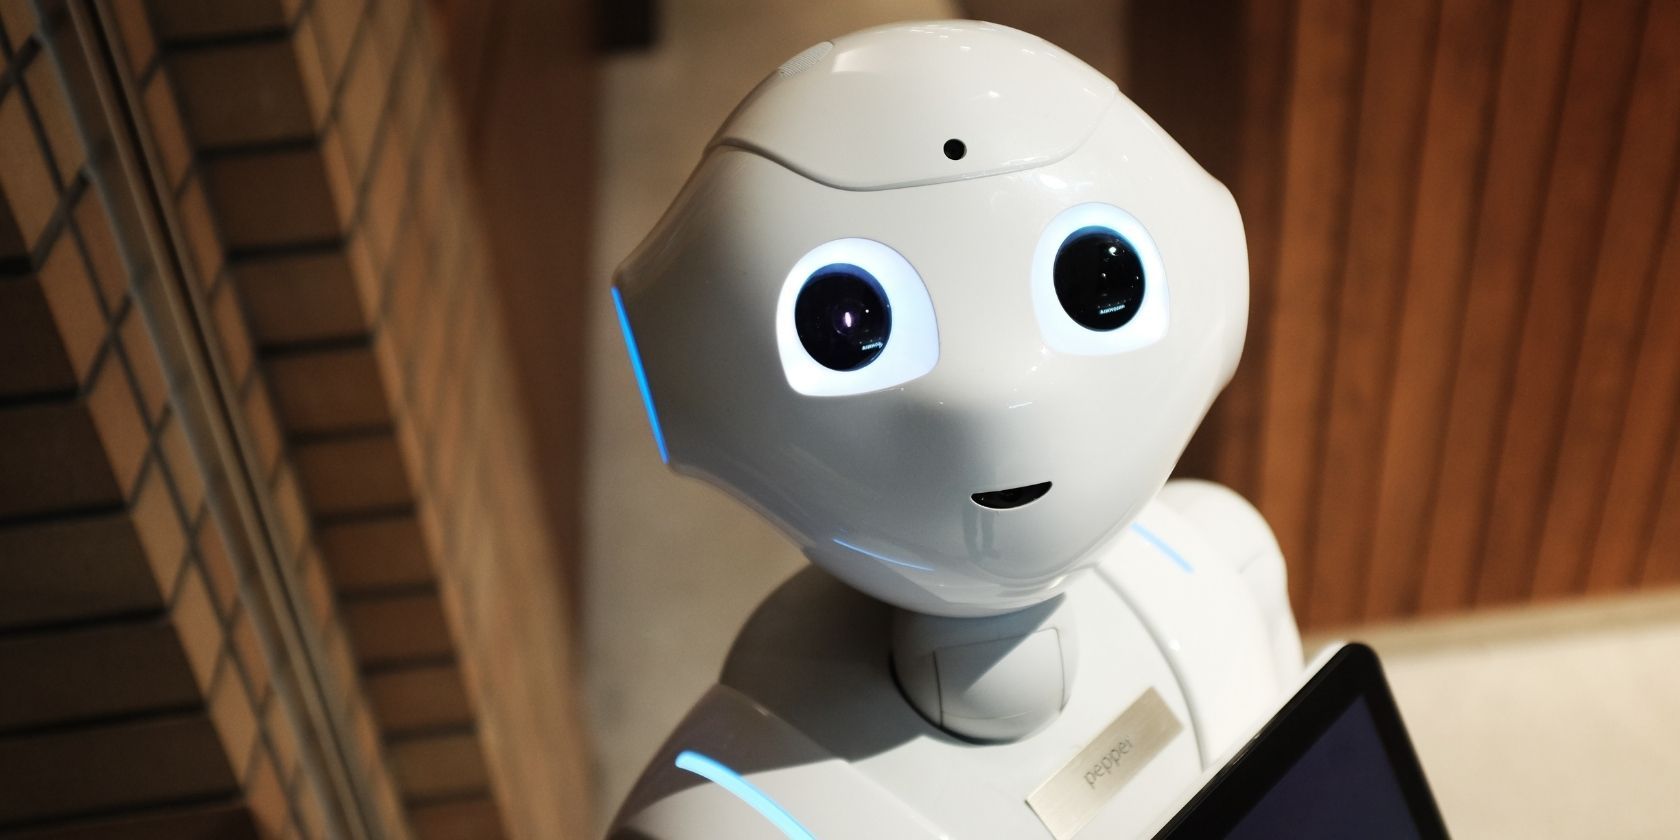 Does a Smart Home Need a Smart Robot?